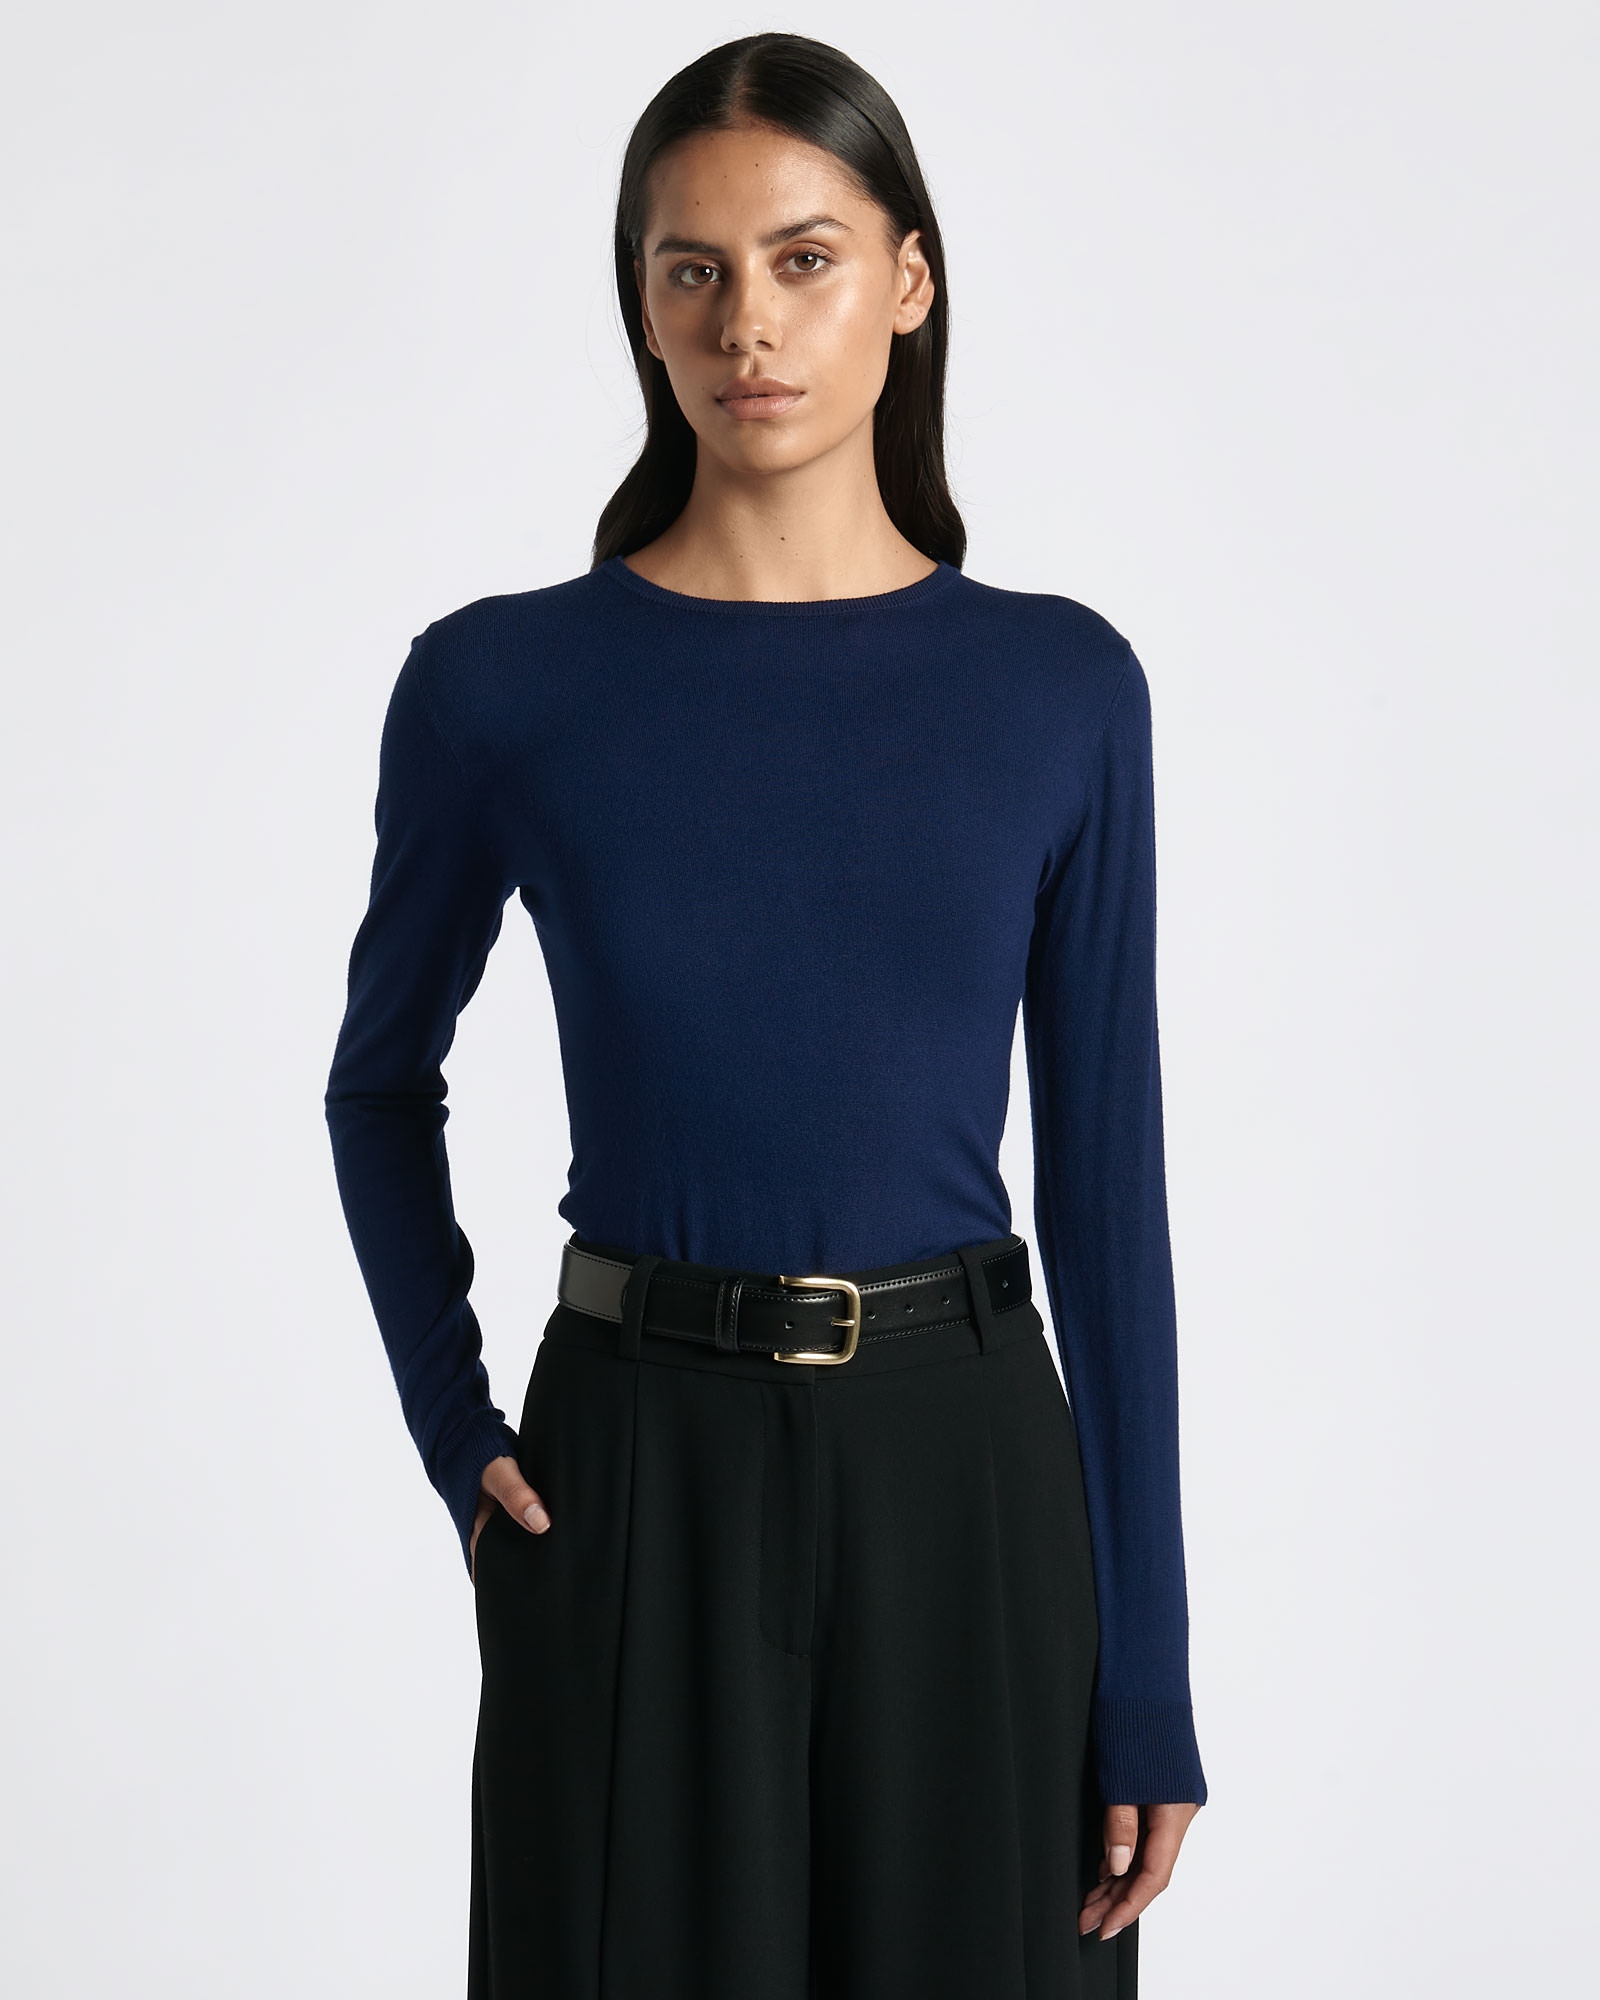 New Arrivals | Long Sleeve Round Neck Knit | 760 Navy